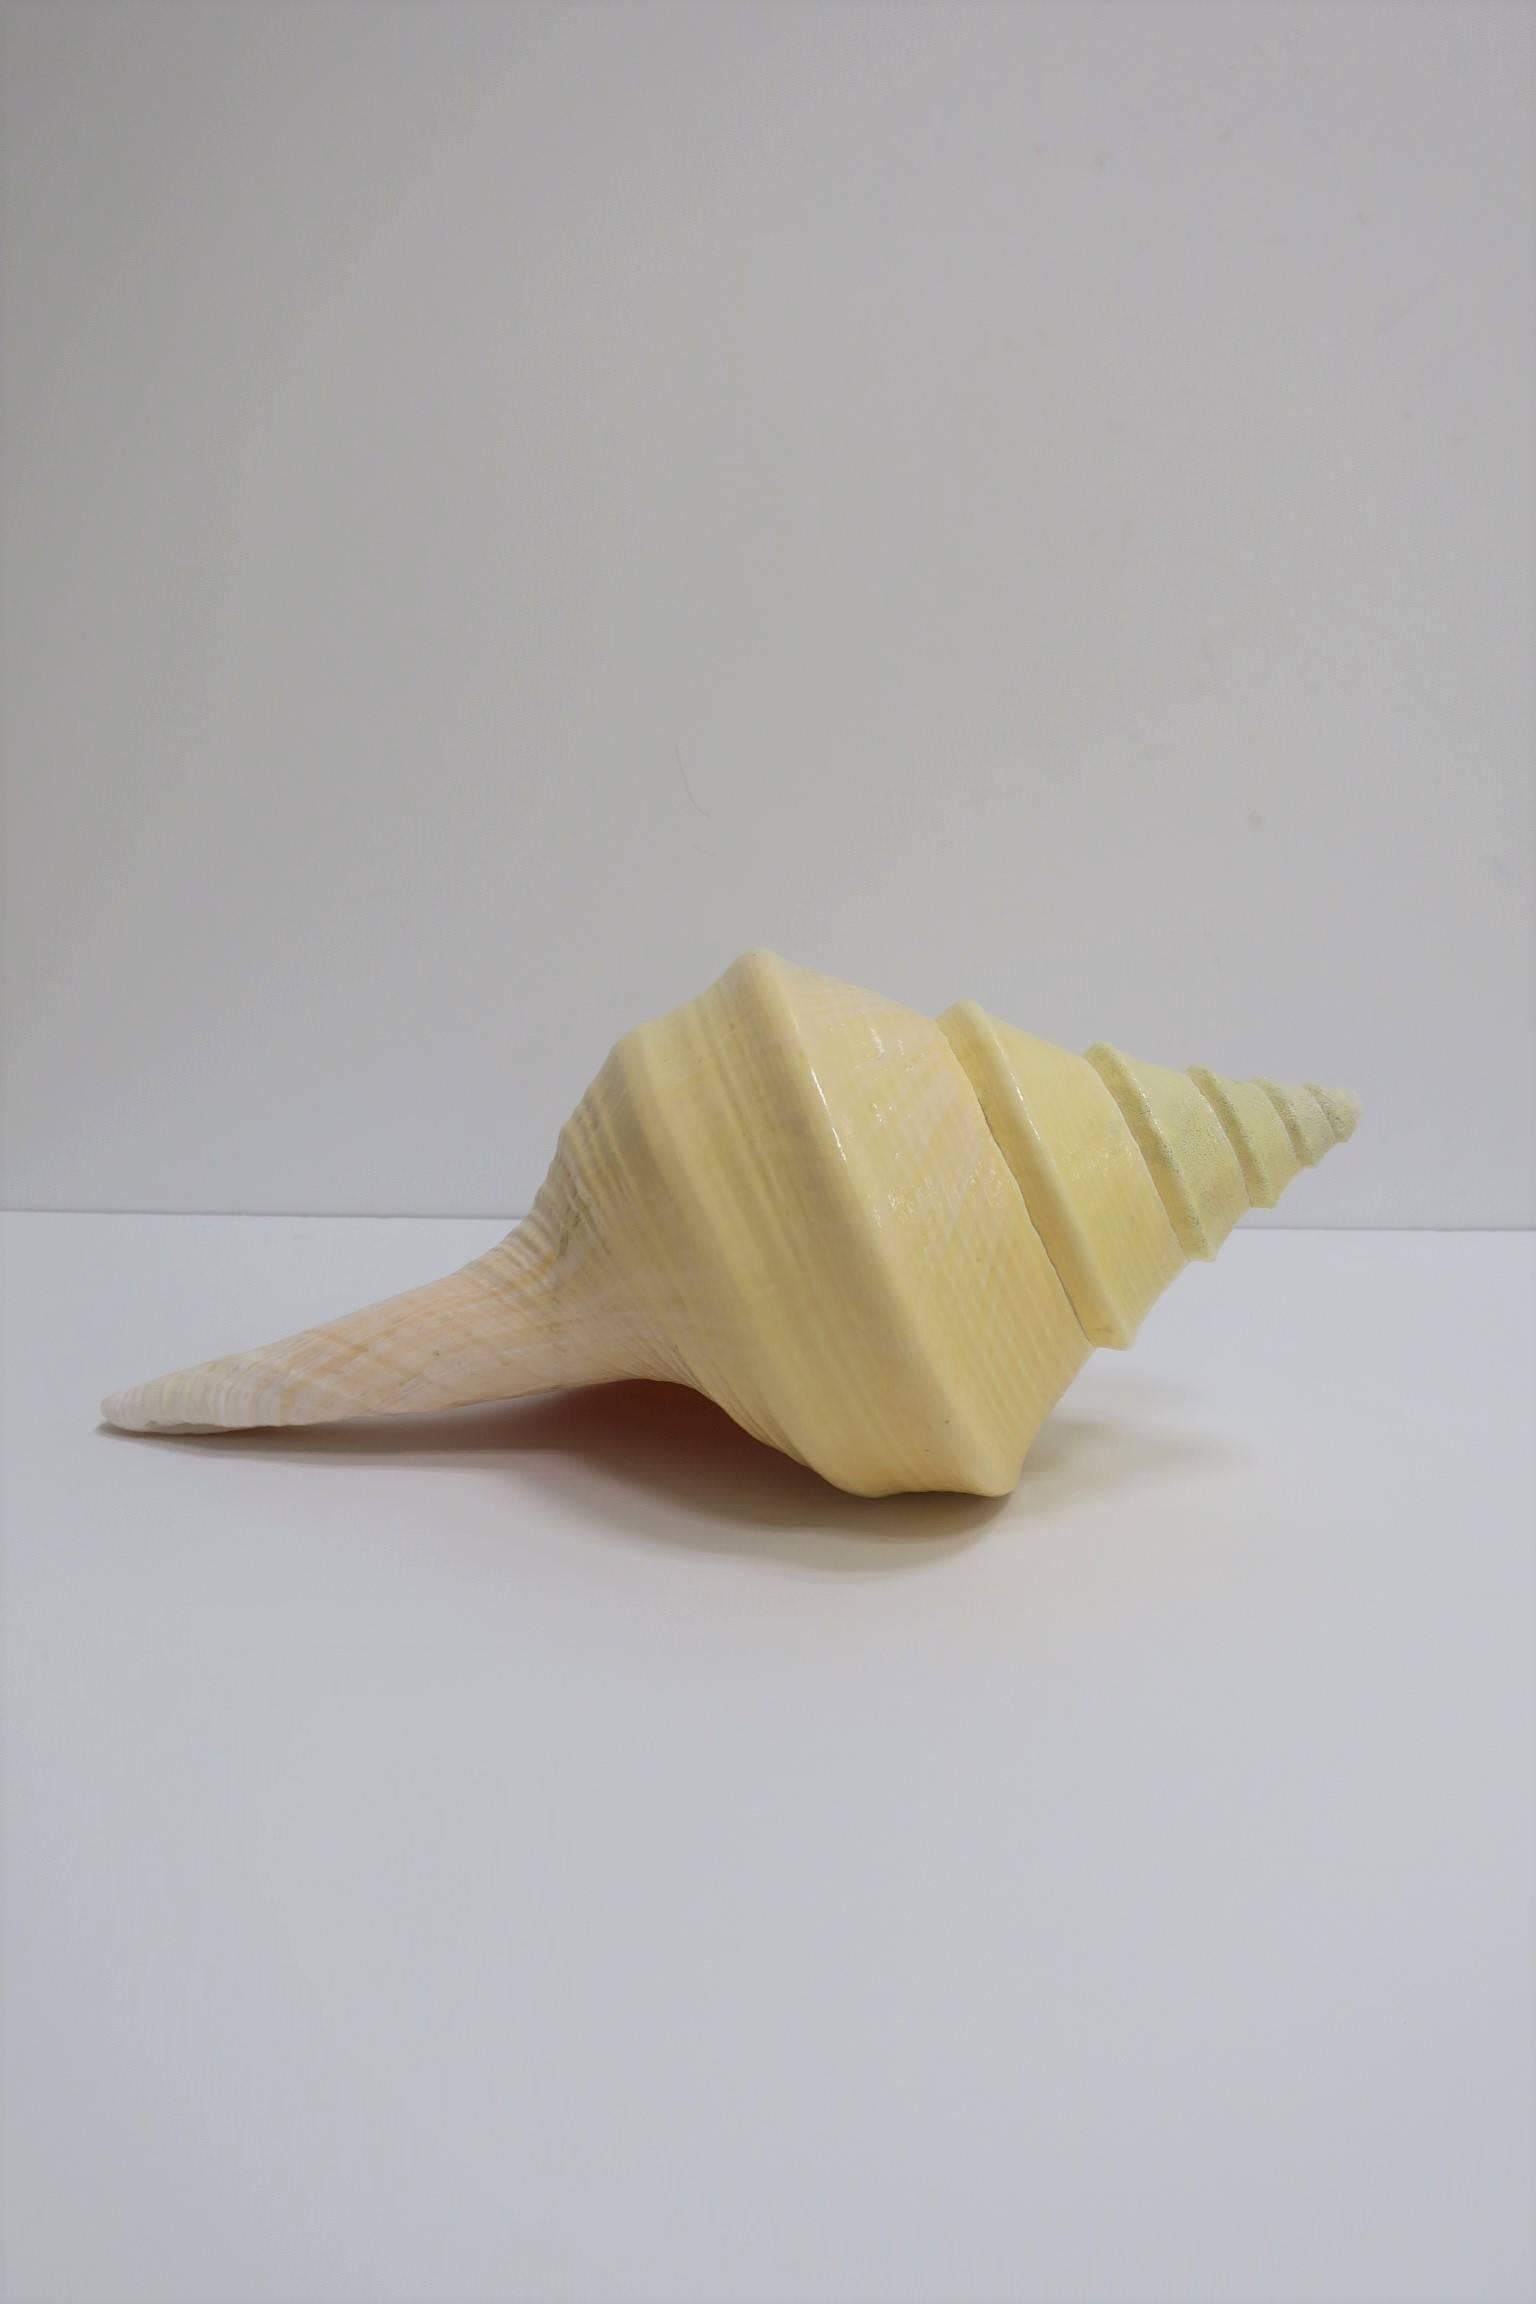 A beautiful and substantial, relatively large, vintage natural sea shell sculpture piece.
A real and very beautiful large sea shell with age and origin unknown. 

Piece measures: 18 in. x 10.5 in. x 8.5 in. H

Item available here online. By request,